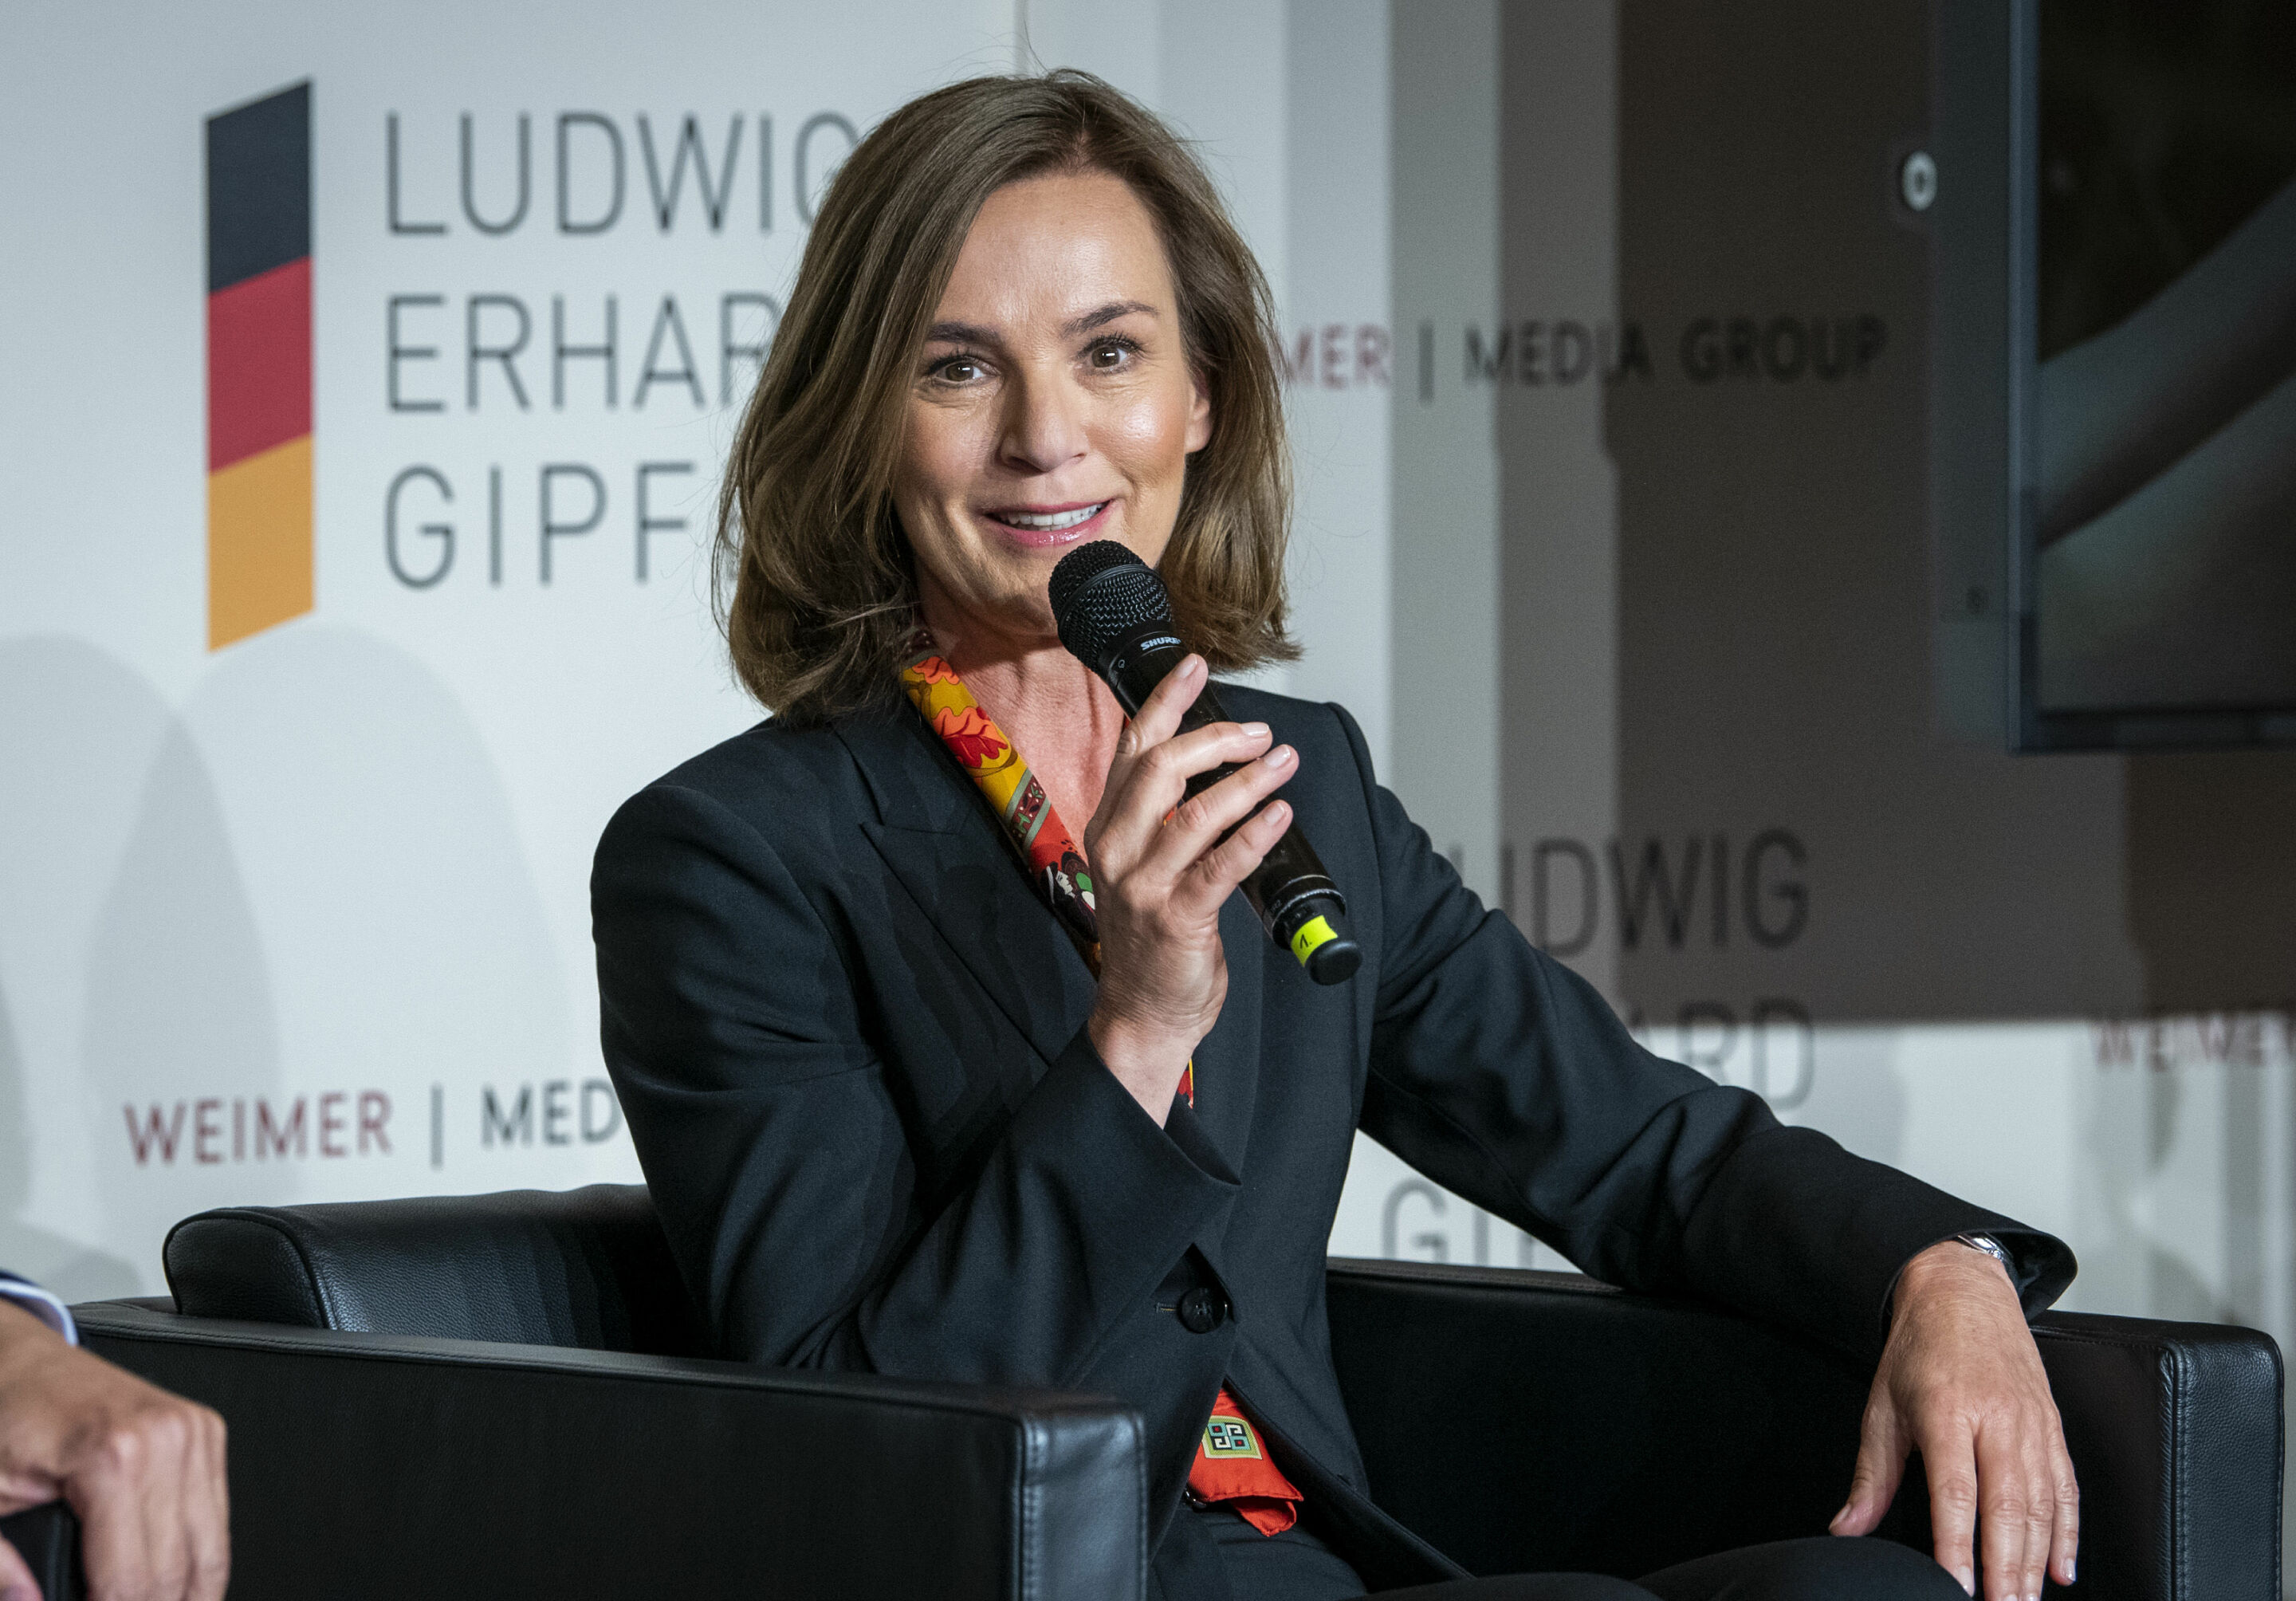 Hildegard Wortmann, Member of the Board of Management for Sales and Marketing, at the Ludwig Erhardt Summit